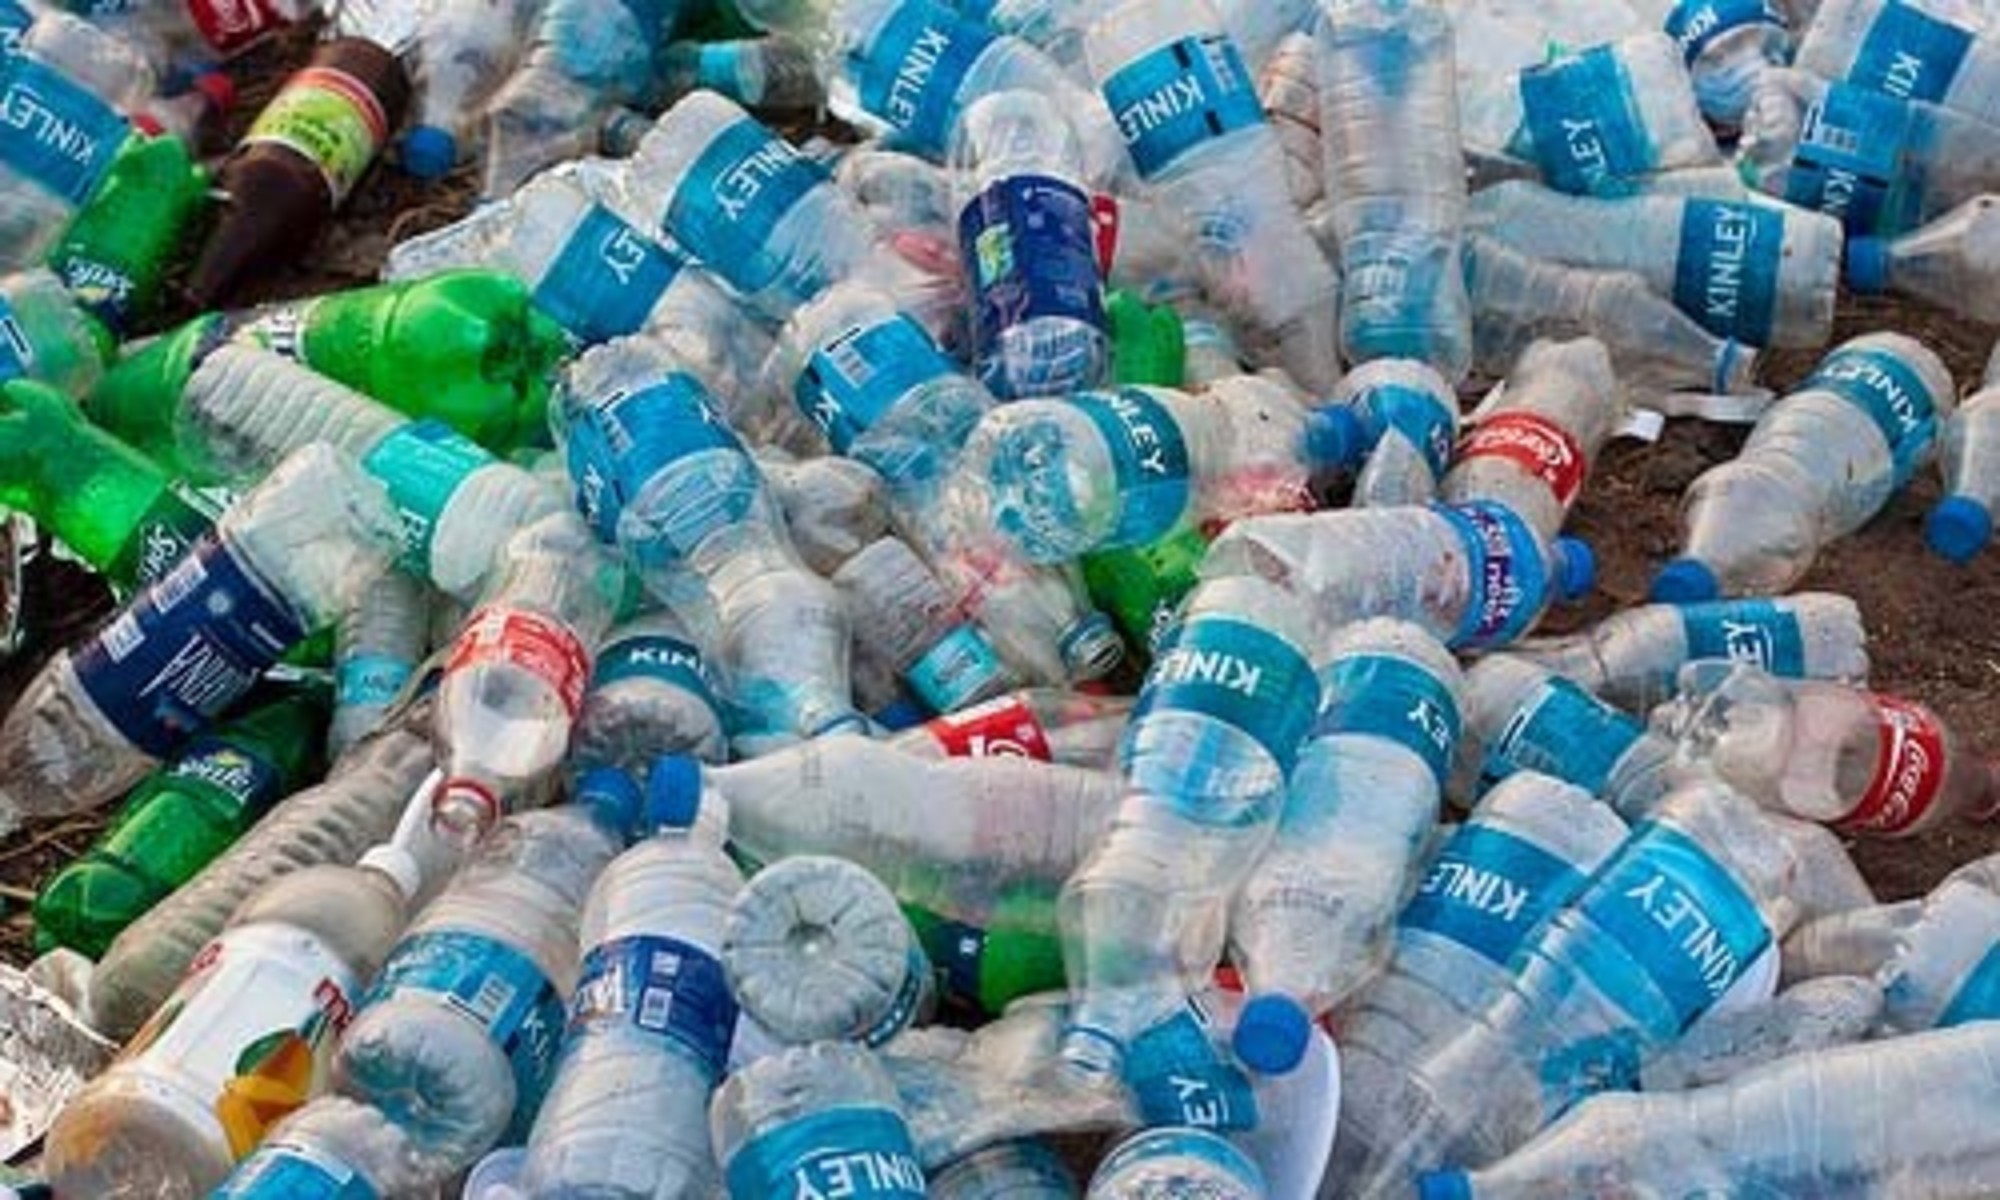 sale and purchase of recycled glass bottles in Houston